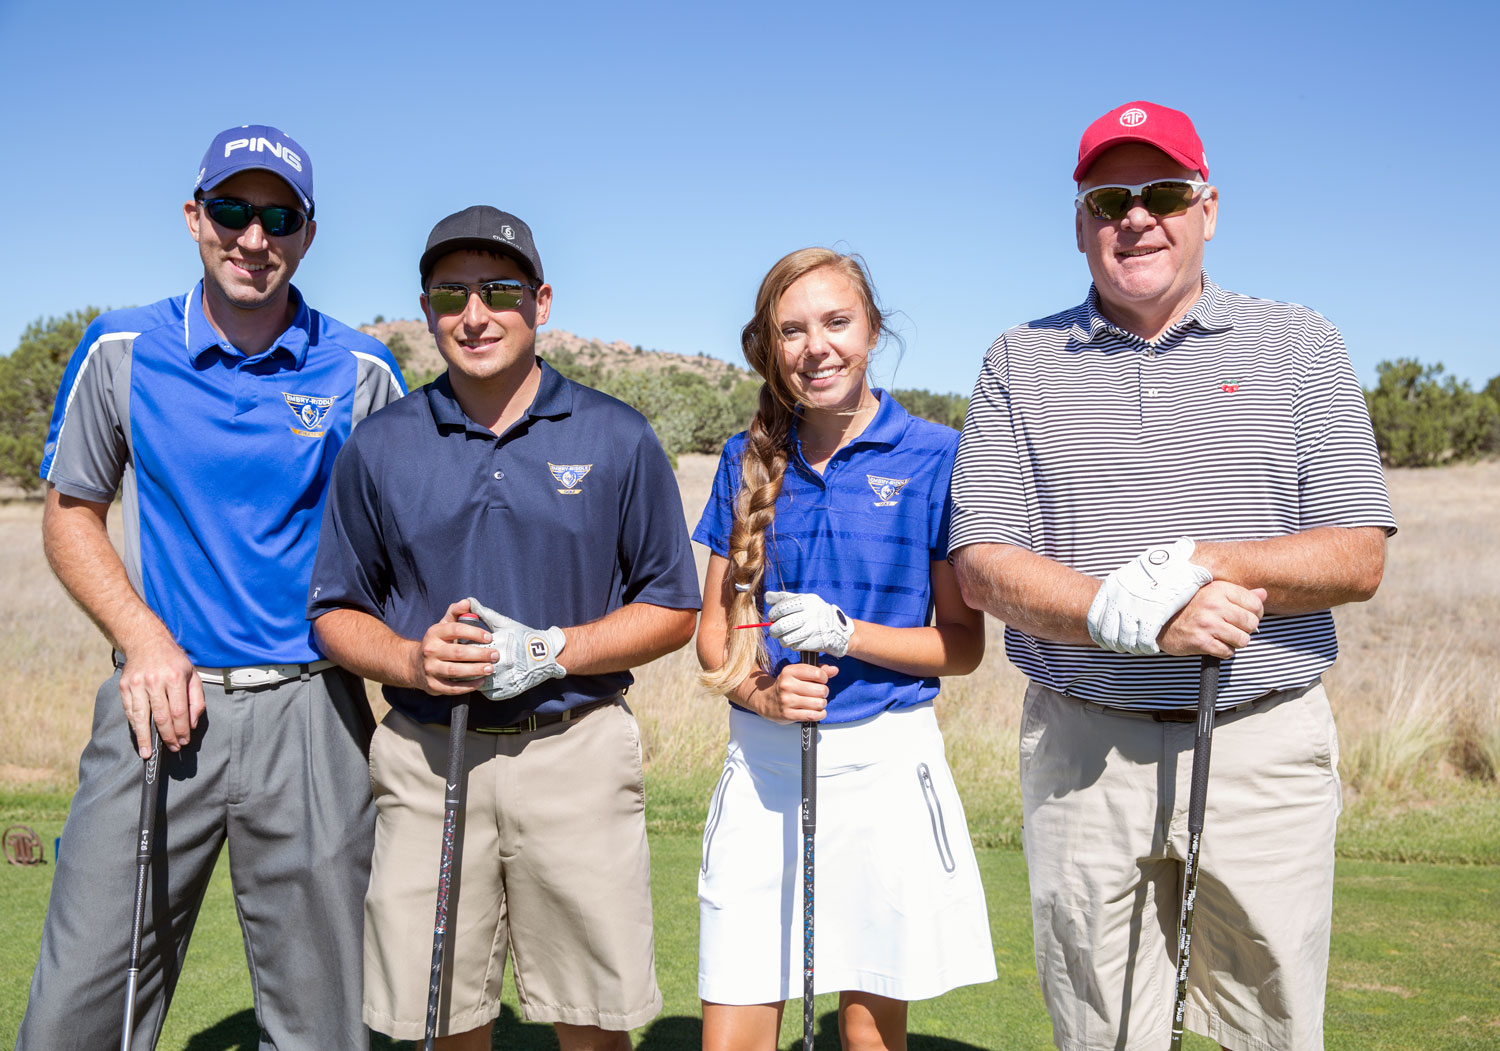 The 26th Annual Alumni Golf Tournament’s winning foursome: Tim Van Ness (’13, PC), Ethan Harman (’14, PC), Calli Gallacher (’17, PC) and her father, Kevin Gallacher. (David Massey photo)